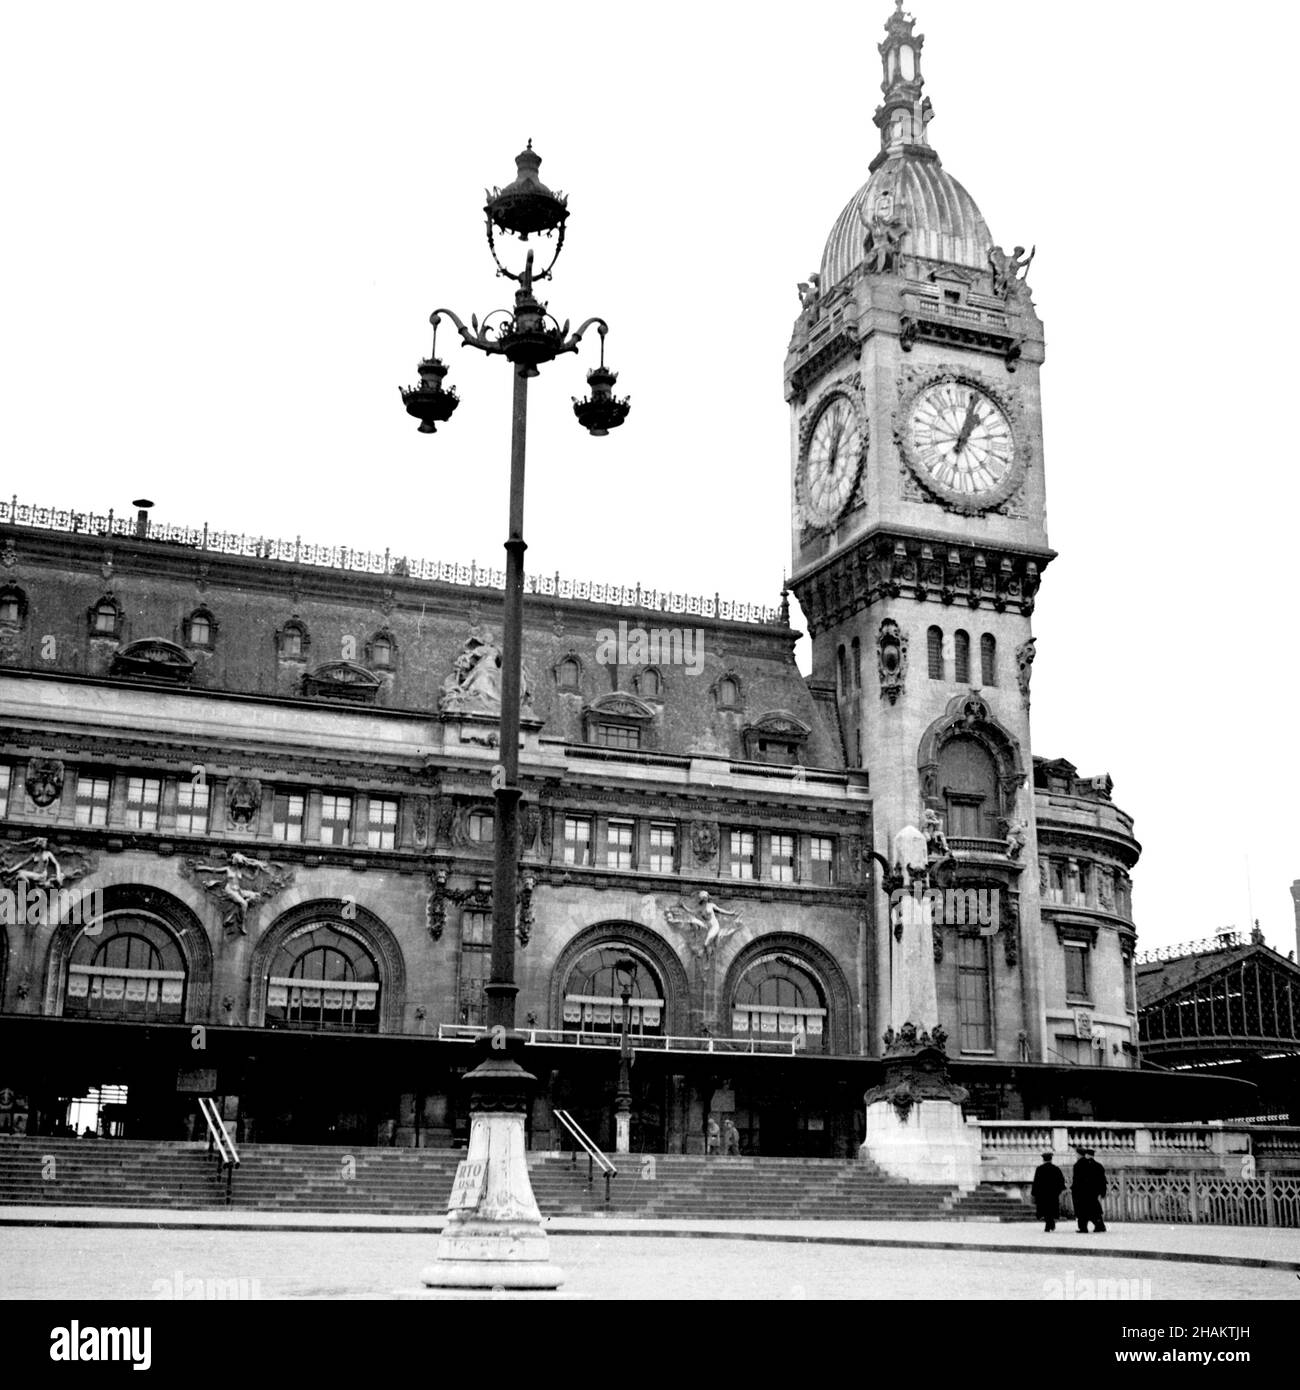 Paris Gare de Lyon, 1945 near the end of WWII. A view of the front of the station with its famous clock tower from the Place Louis Armand. The station looks deserted with no vehicles and only three pedestrians in sight. Stock Photo